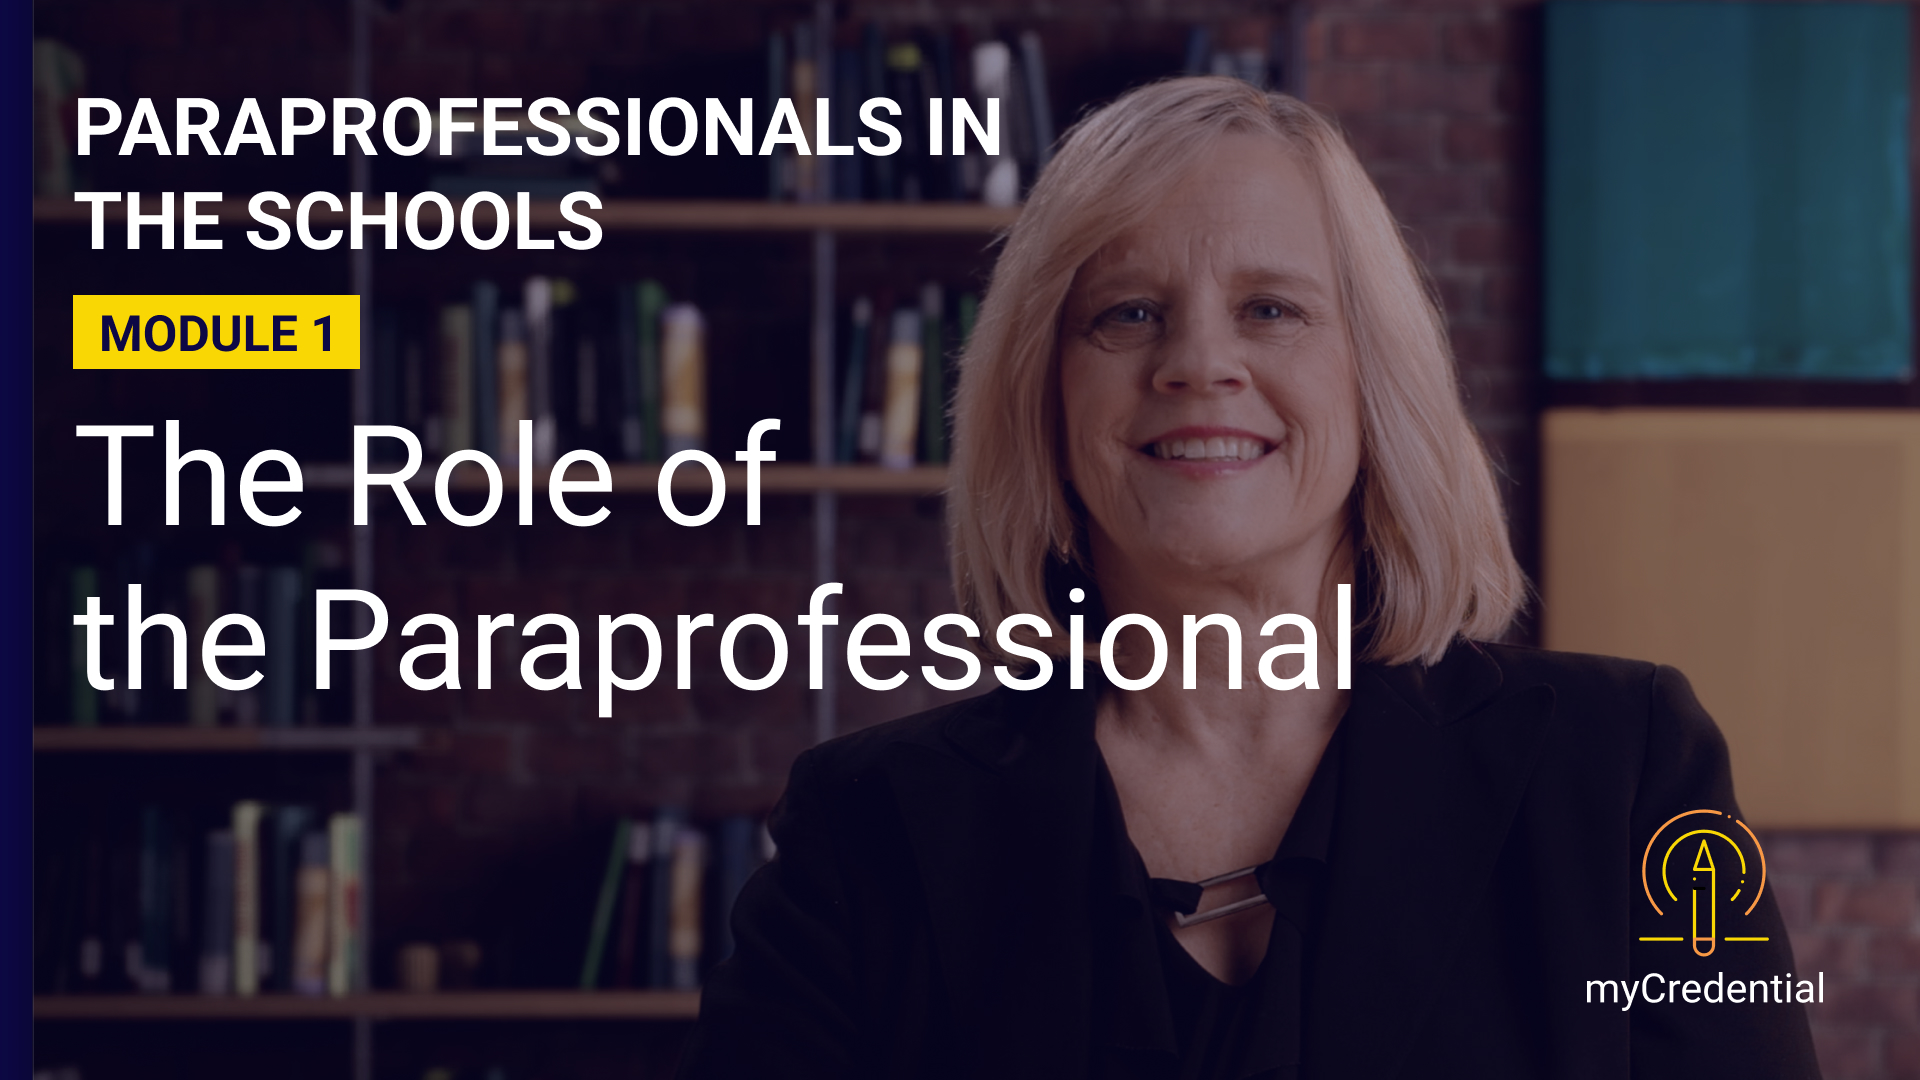 Paraprofessionals in the Schools (Module 1): The Role of the Paraprofessional